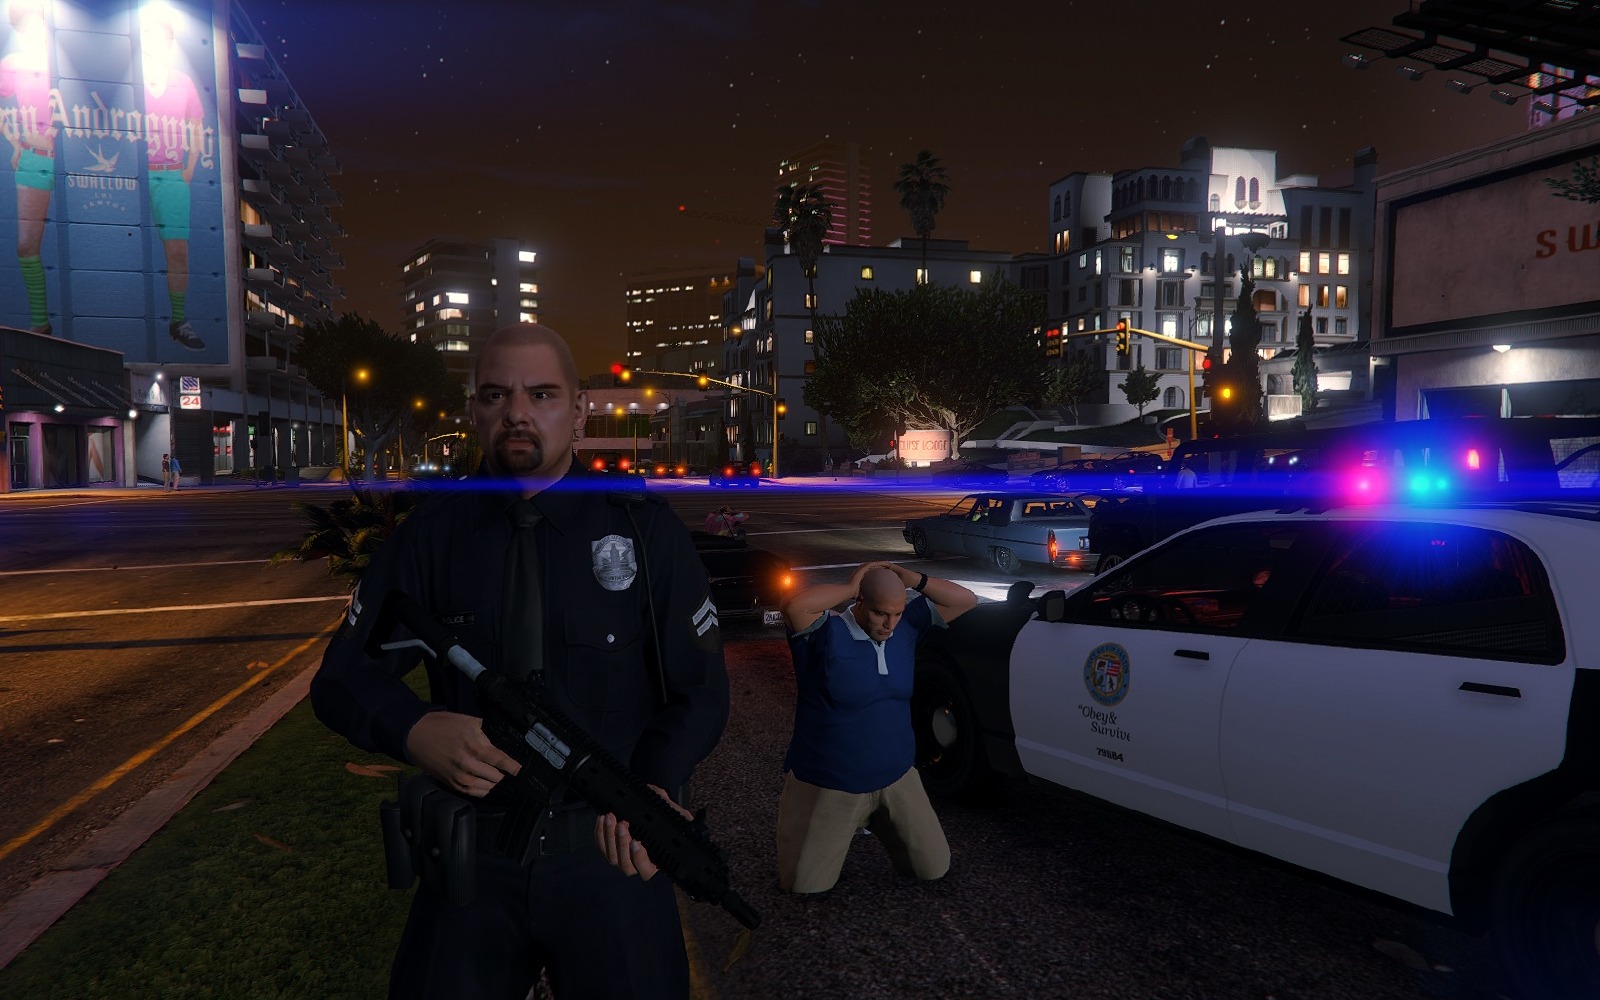 Download Police Mod 1.0c for GTA 5